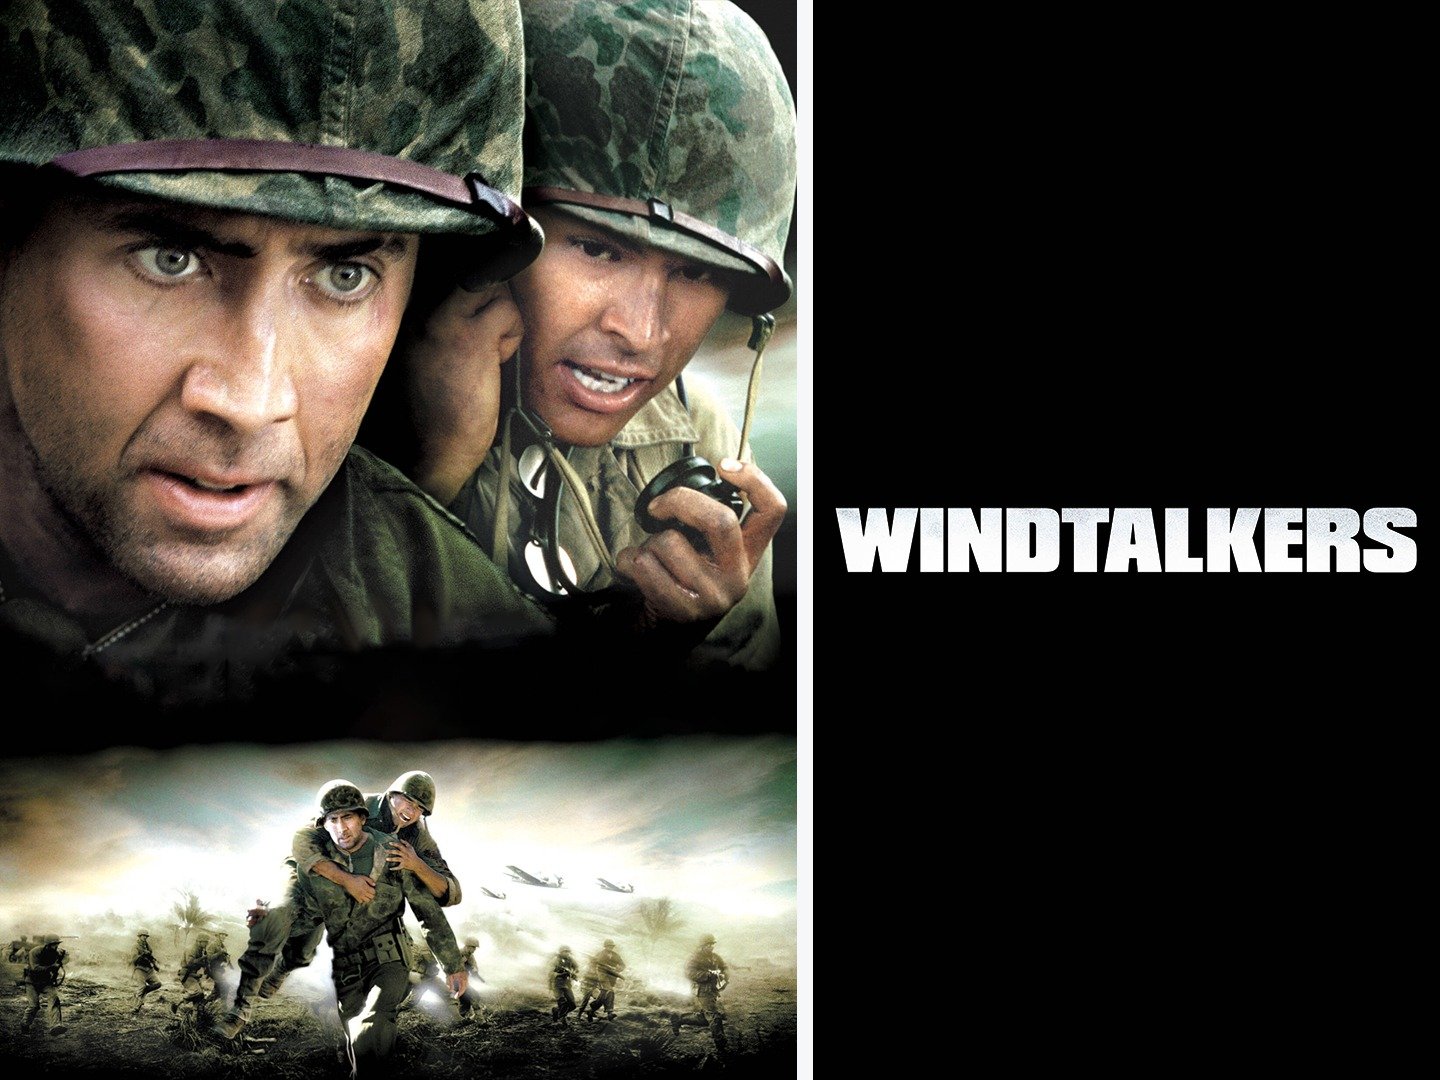 windtalkers dvd cover